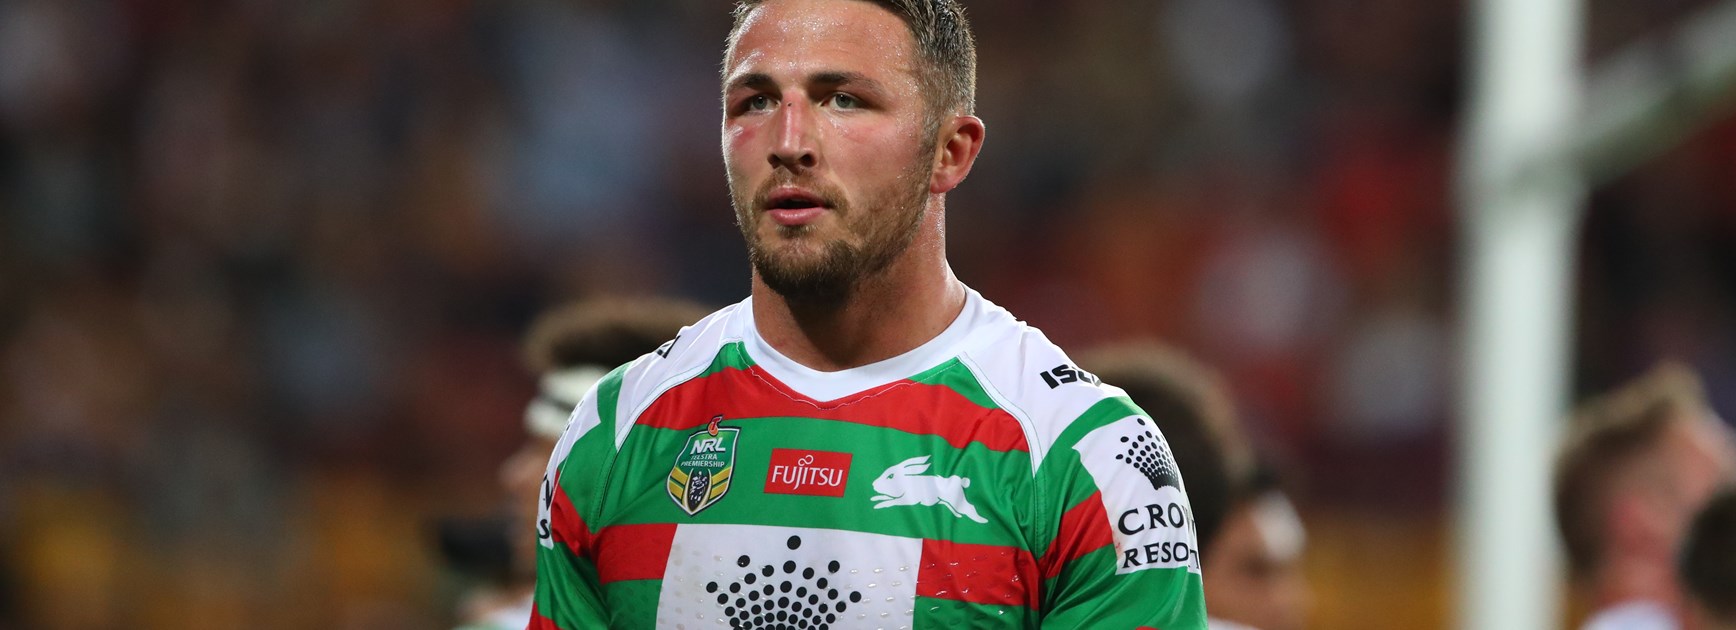 Sam Burgess charged with intimidation after domestic dispute